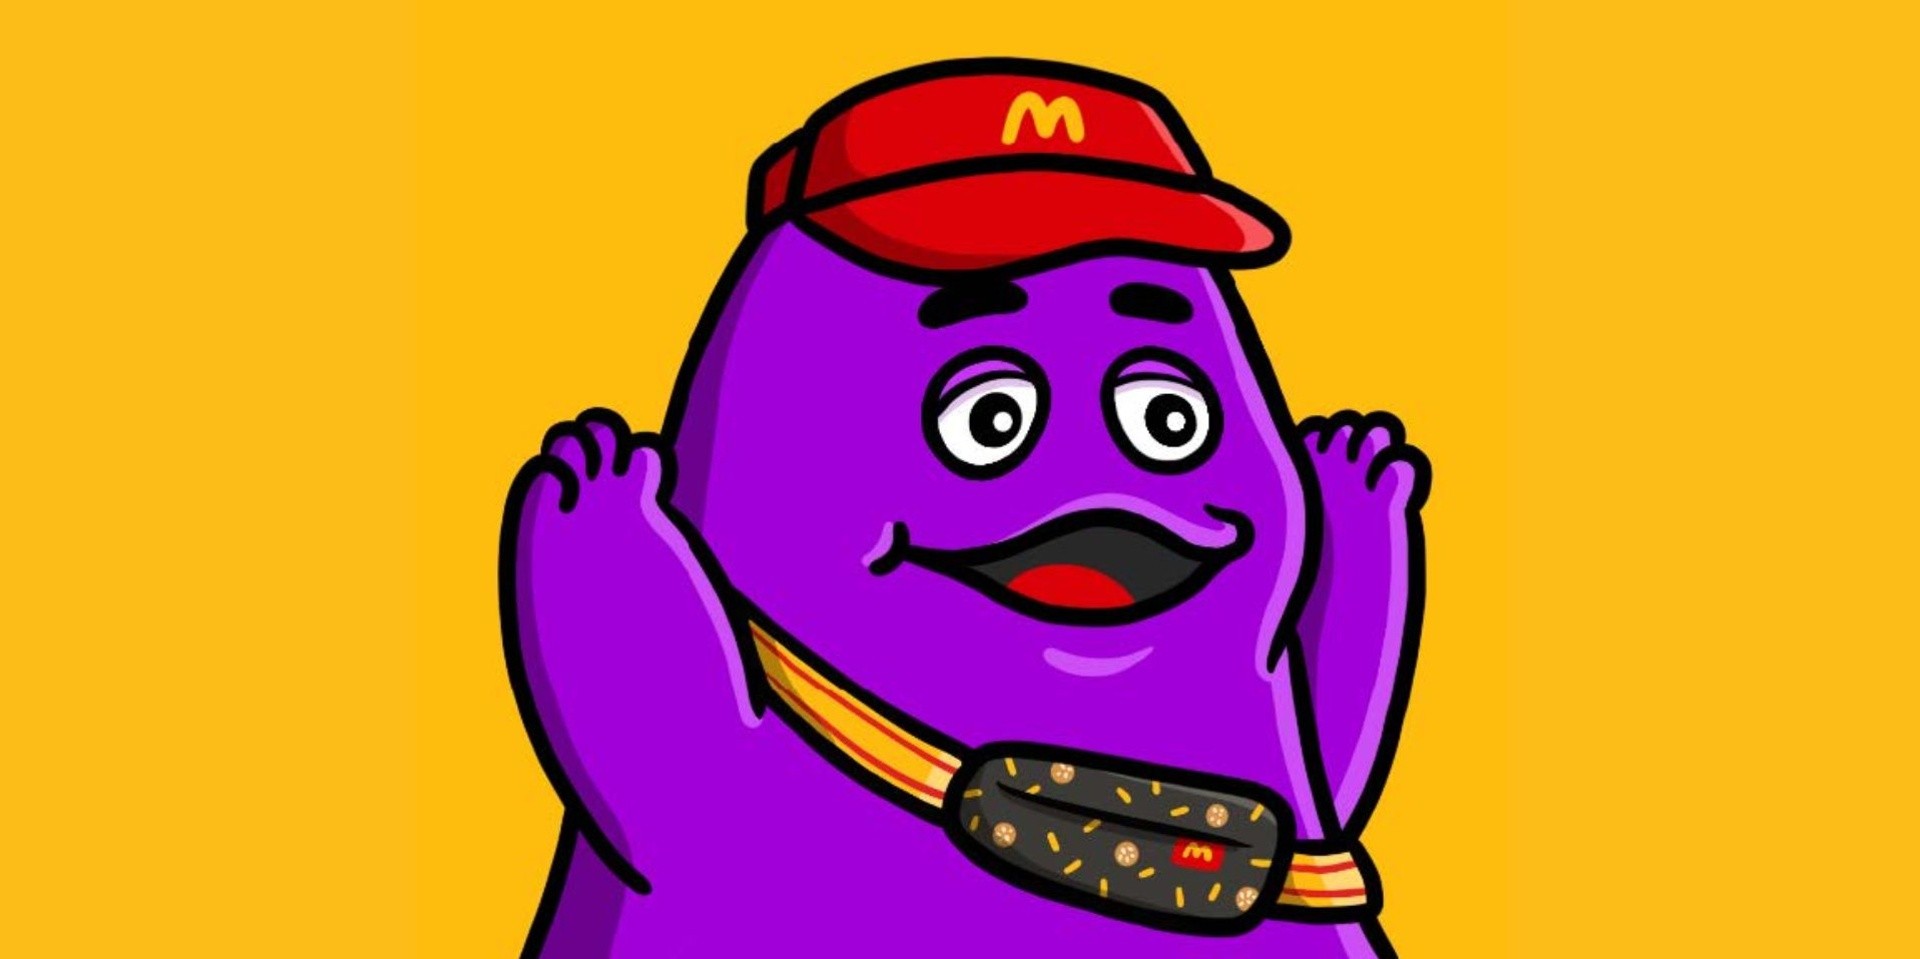 McDonald's Singapore partners with Bandwagon Labs to launch Grimace digital collectibles